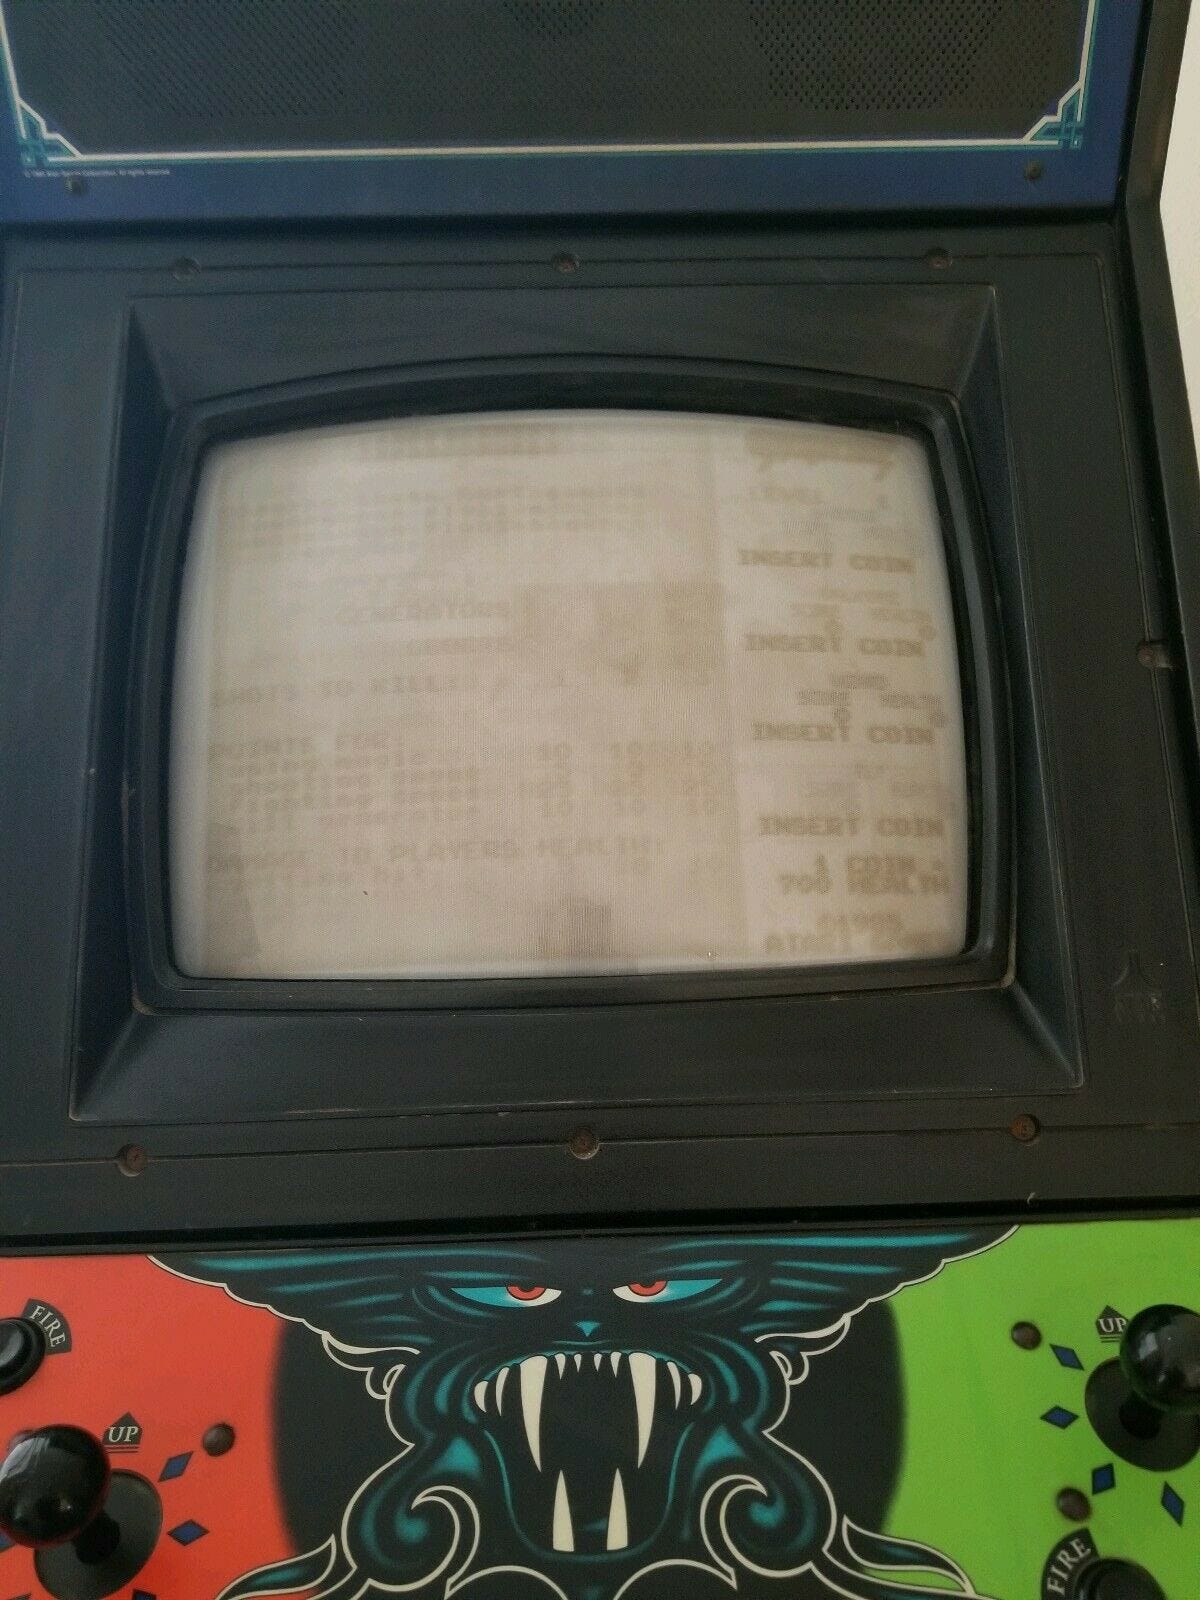 What video games are burned into these CRTs?